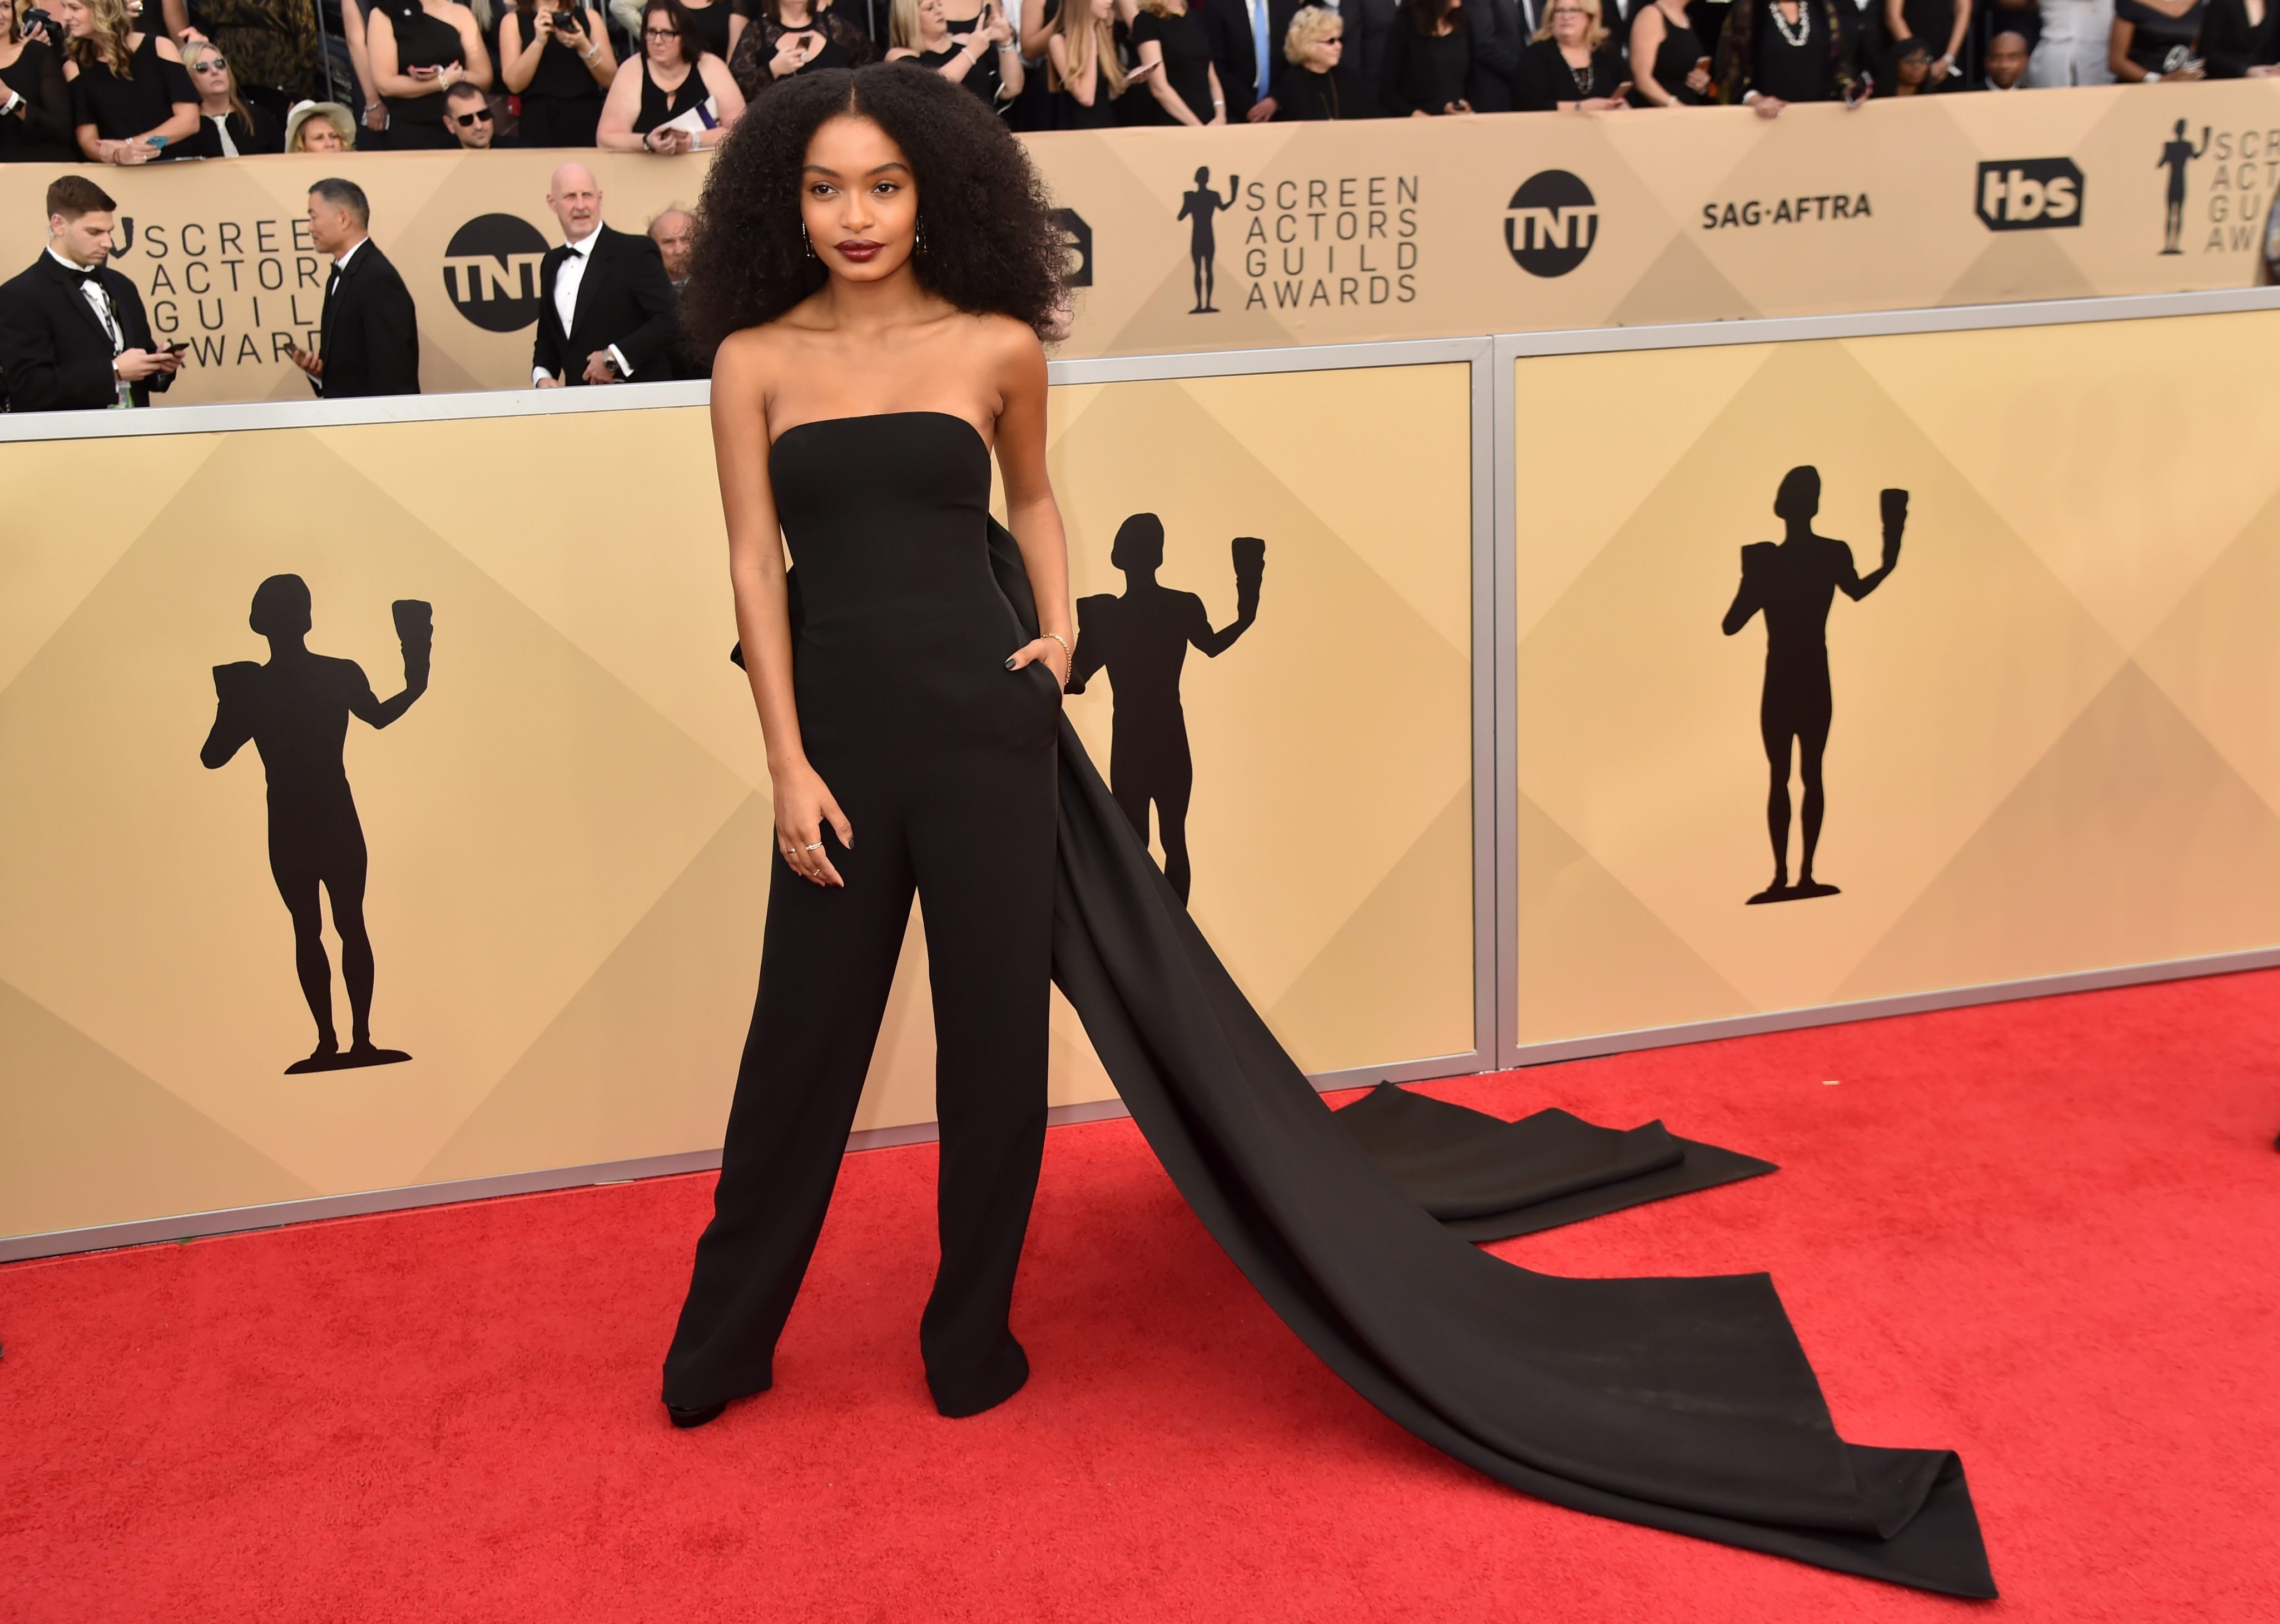 20 Amazing Looks from the Screen Actors Guild Awards Red Carpet FASHION Magazine